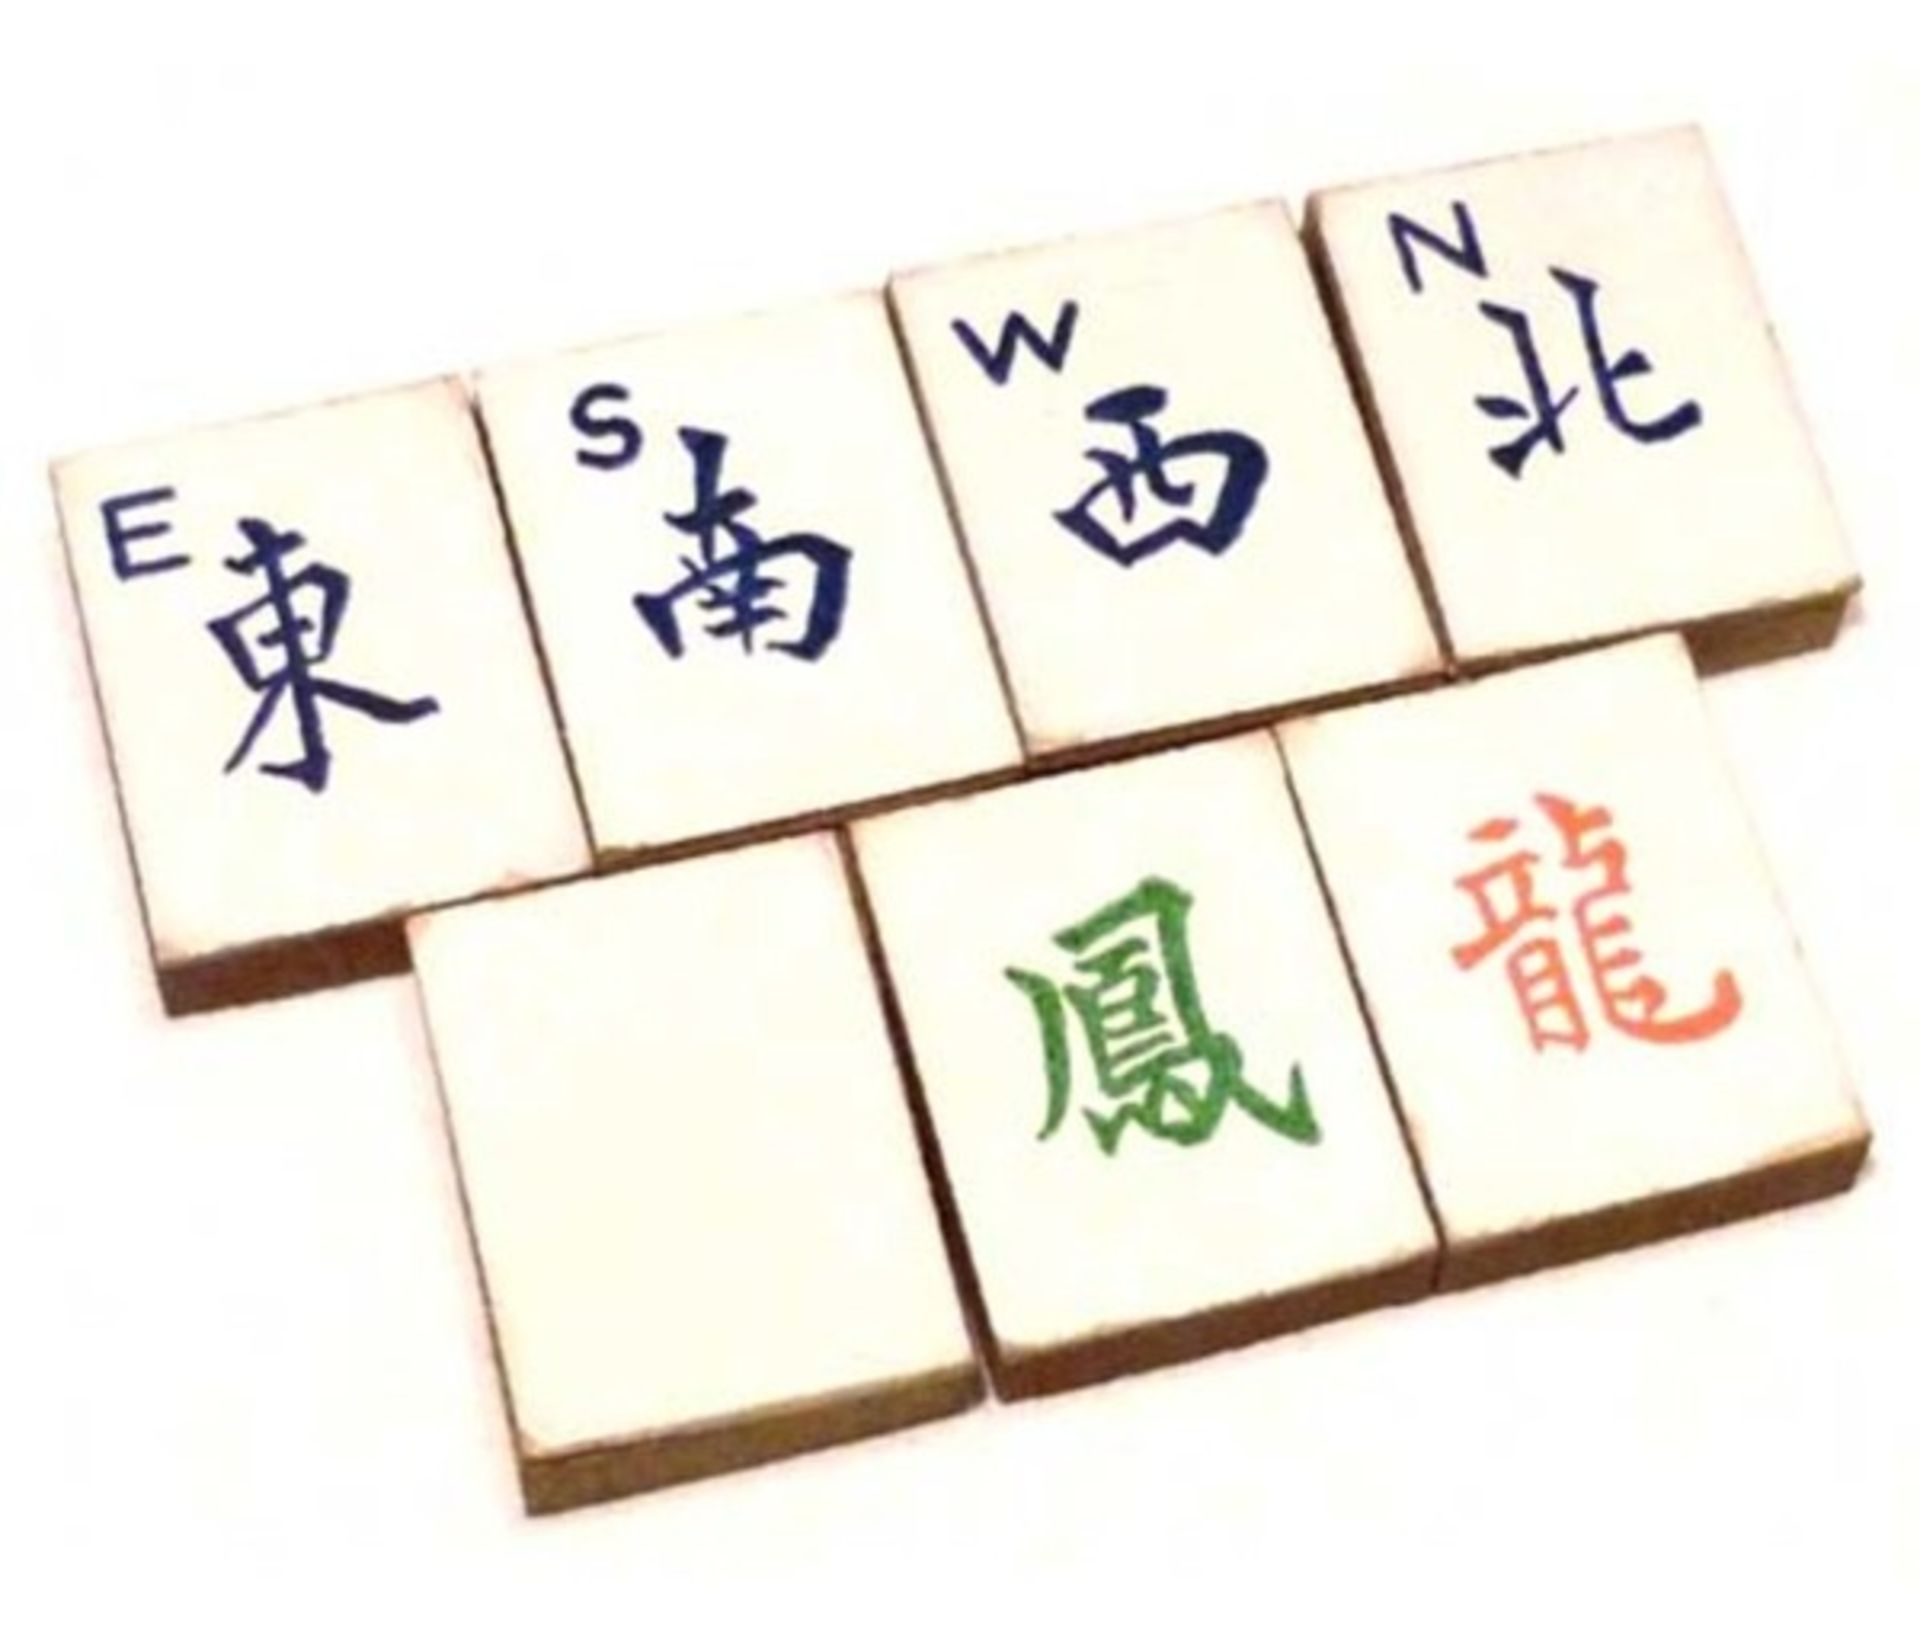 (Mahjong) Mahjong VS, The complete ancient and fascinating Chinese game, ca. 1924 - Bild 9 aus 13